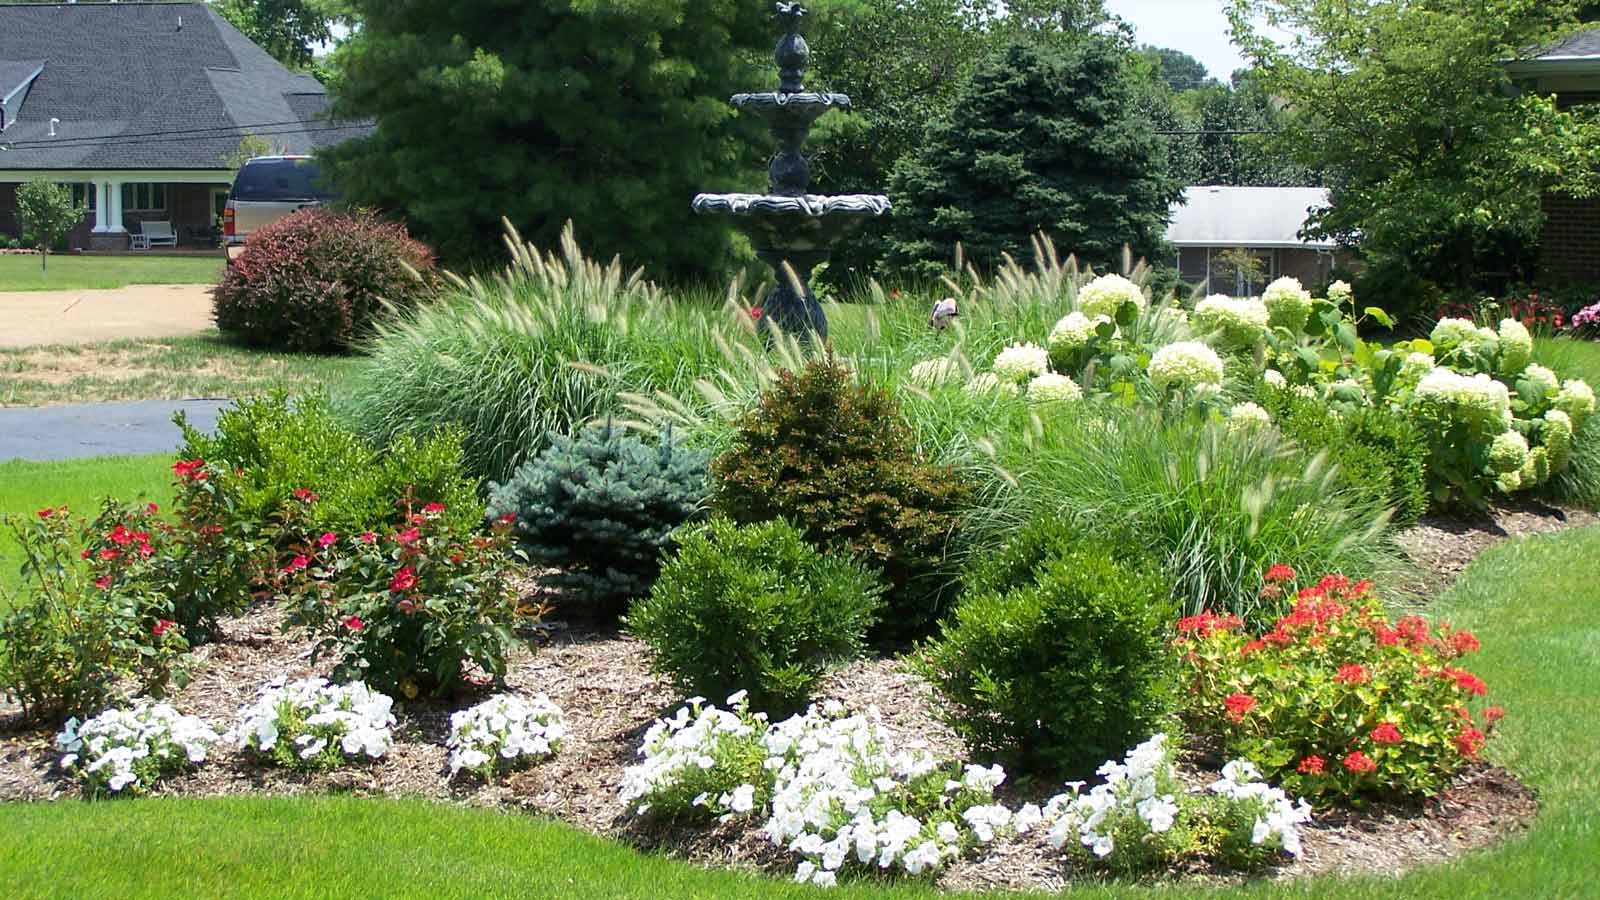 Let's Discuss Your Landscaping Project